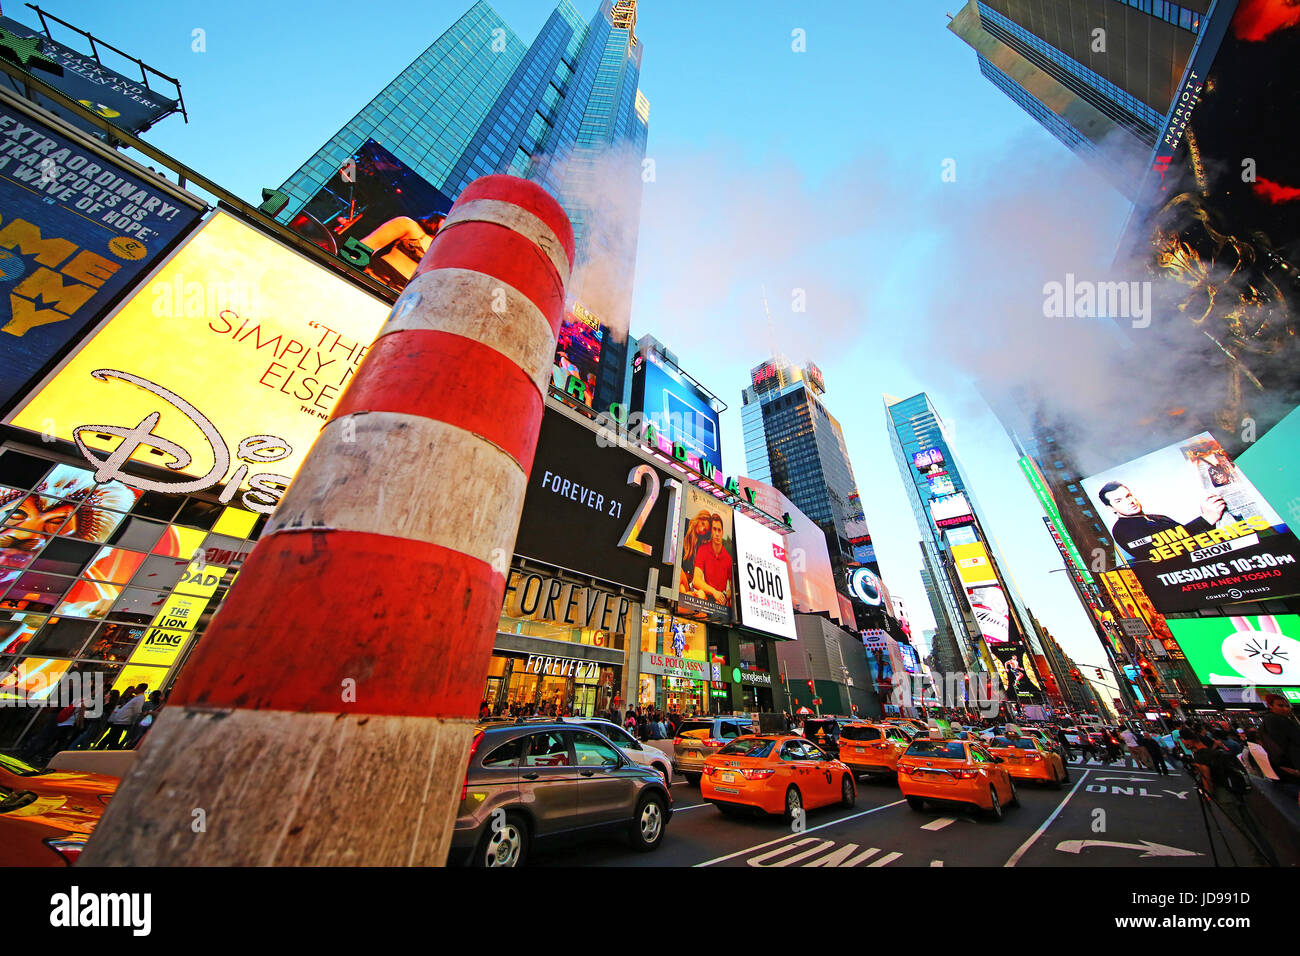 Steam vent in Times Square, New York City, New York, USA Stock Photo